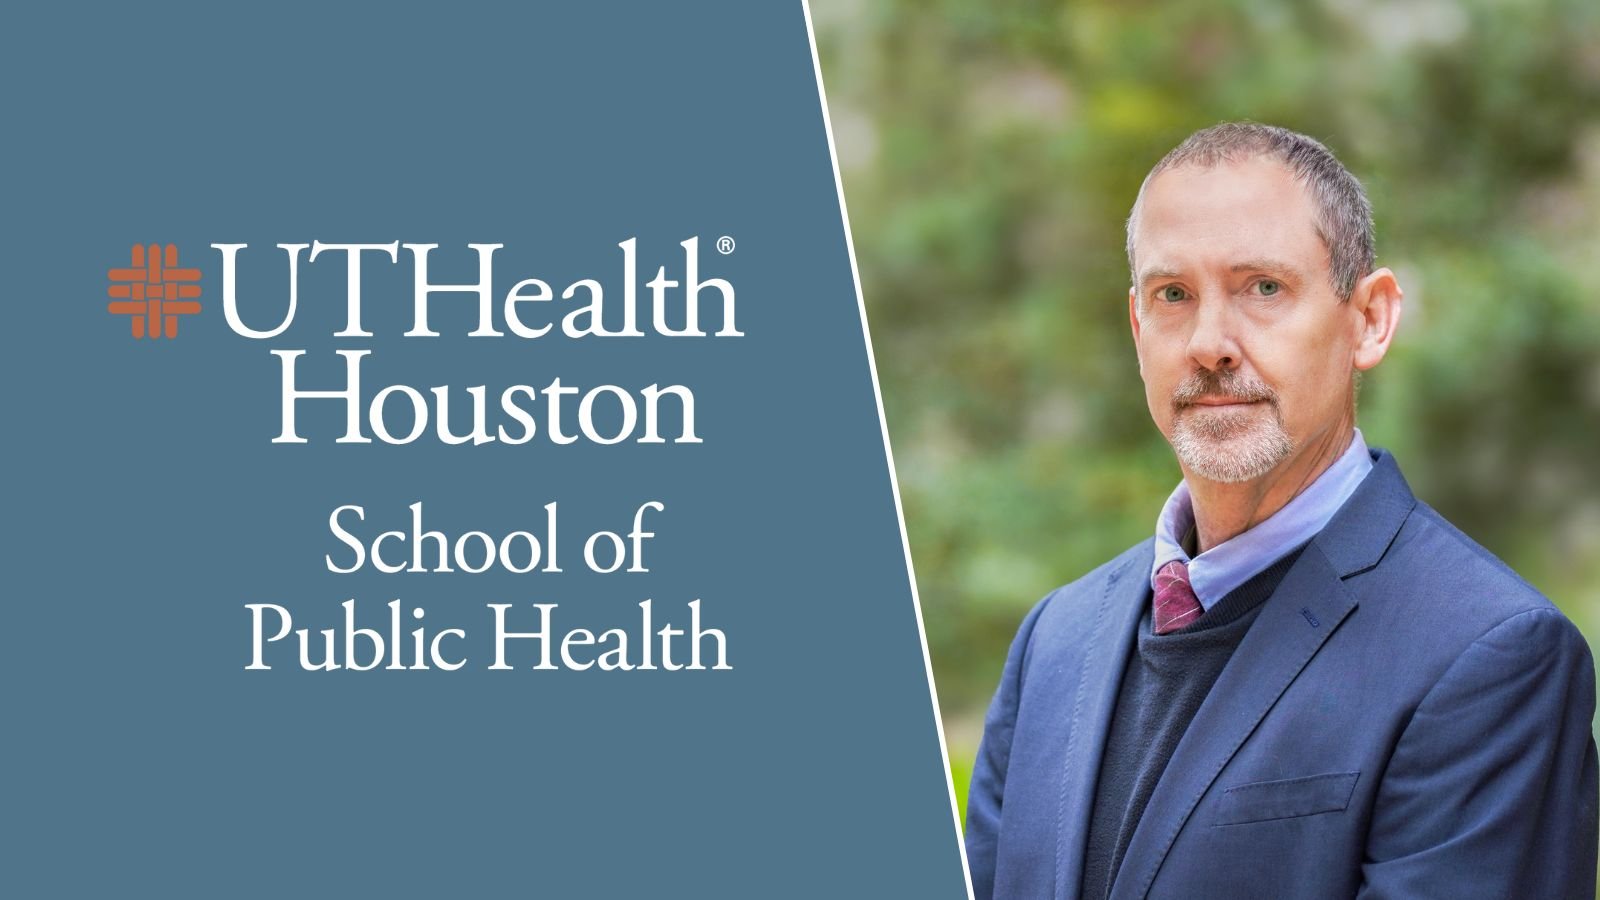 Andrew Springer, DrPH, MPH, with UTHealth Houston School of Public Health has been inducted as a member of the 2024 class of The University of Texas Kenneth I. Shine, MD, Academy of Health Science Education.